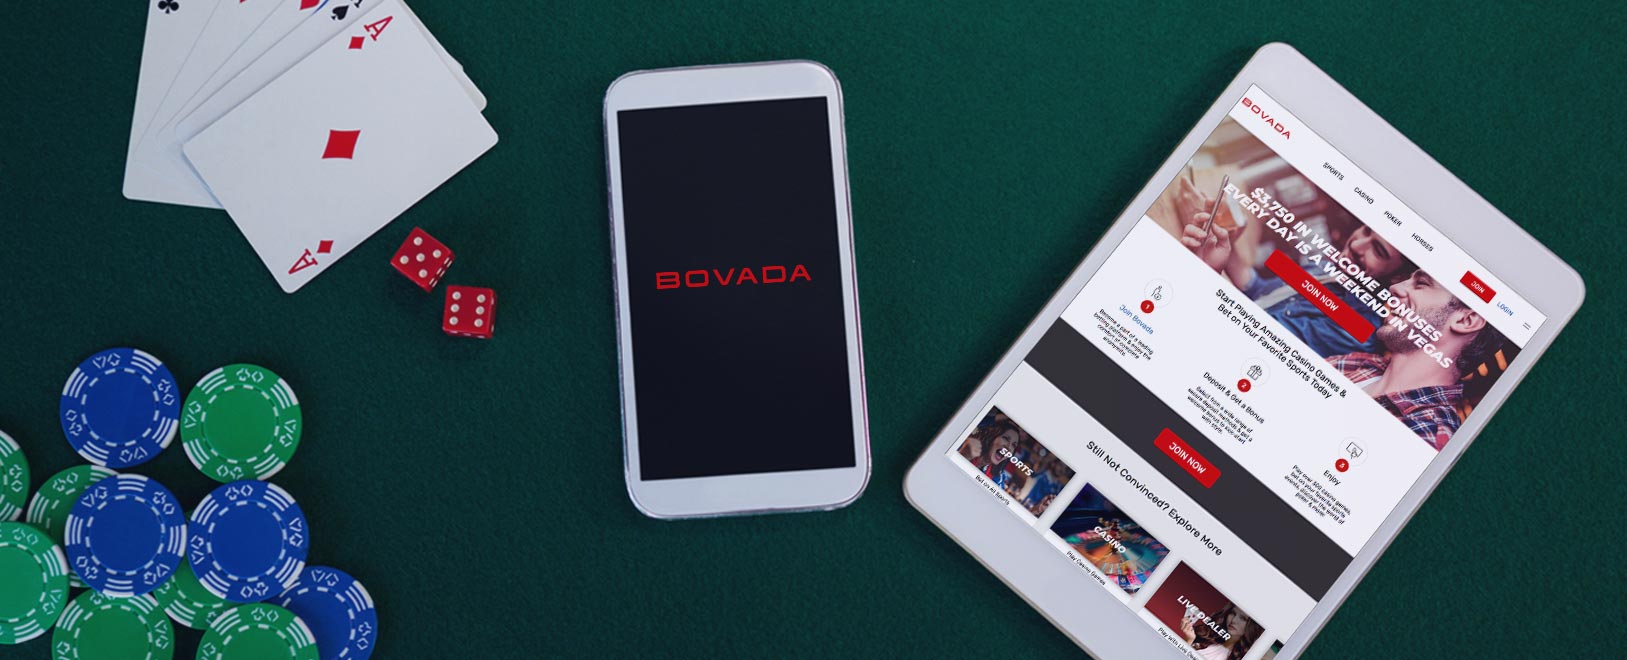 How to Play Casino Games From Your Mobile at Bovada